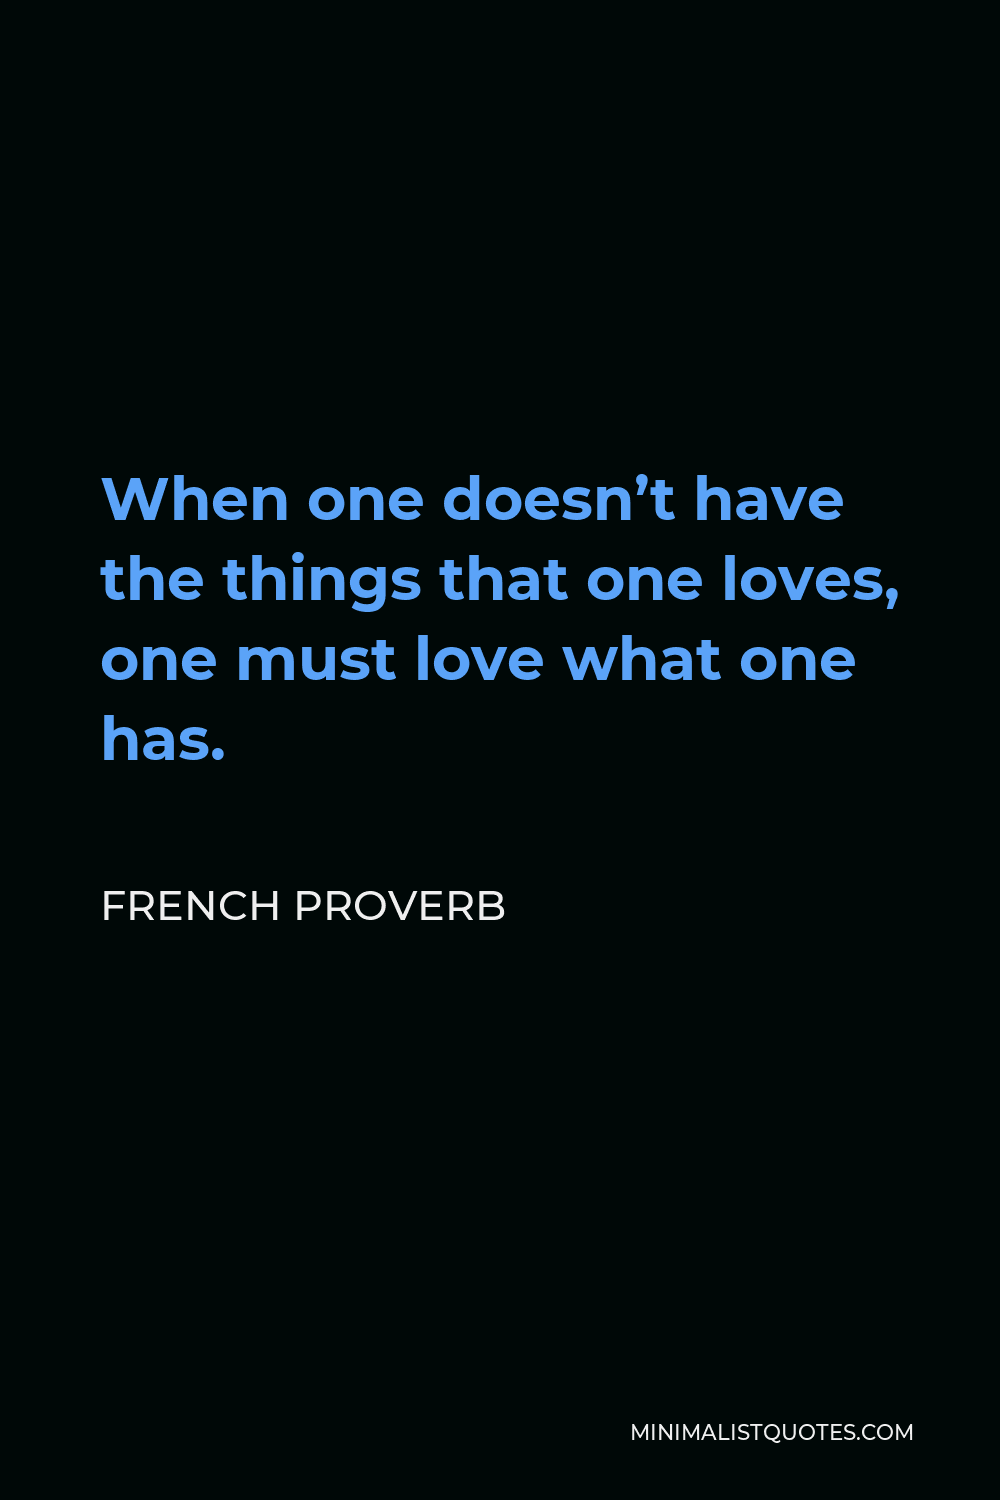 French Proverb Quote - When one doesn’t have the things that one loves, one must love what one has.